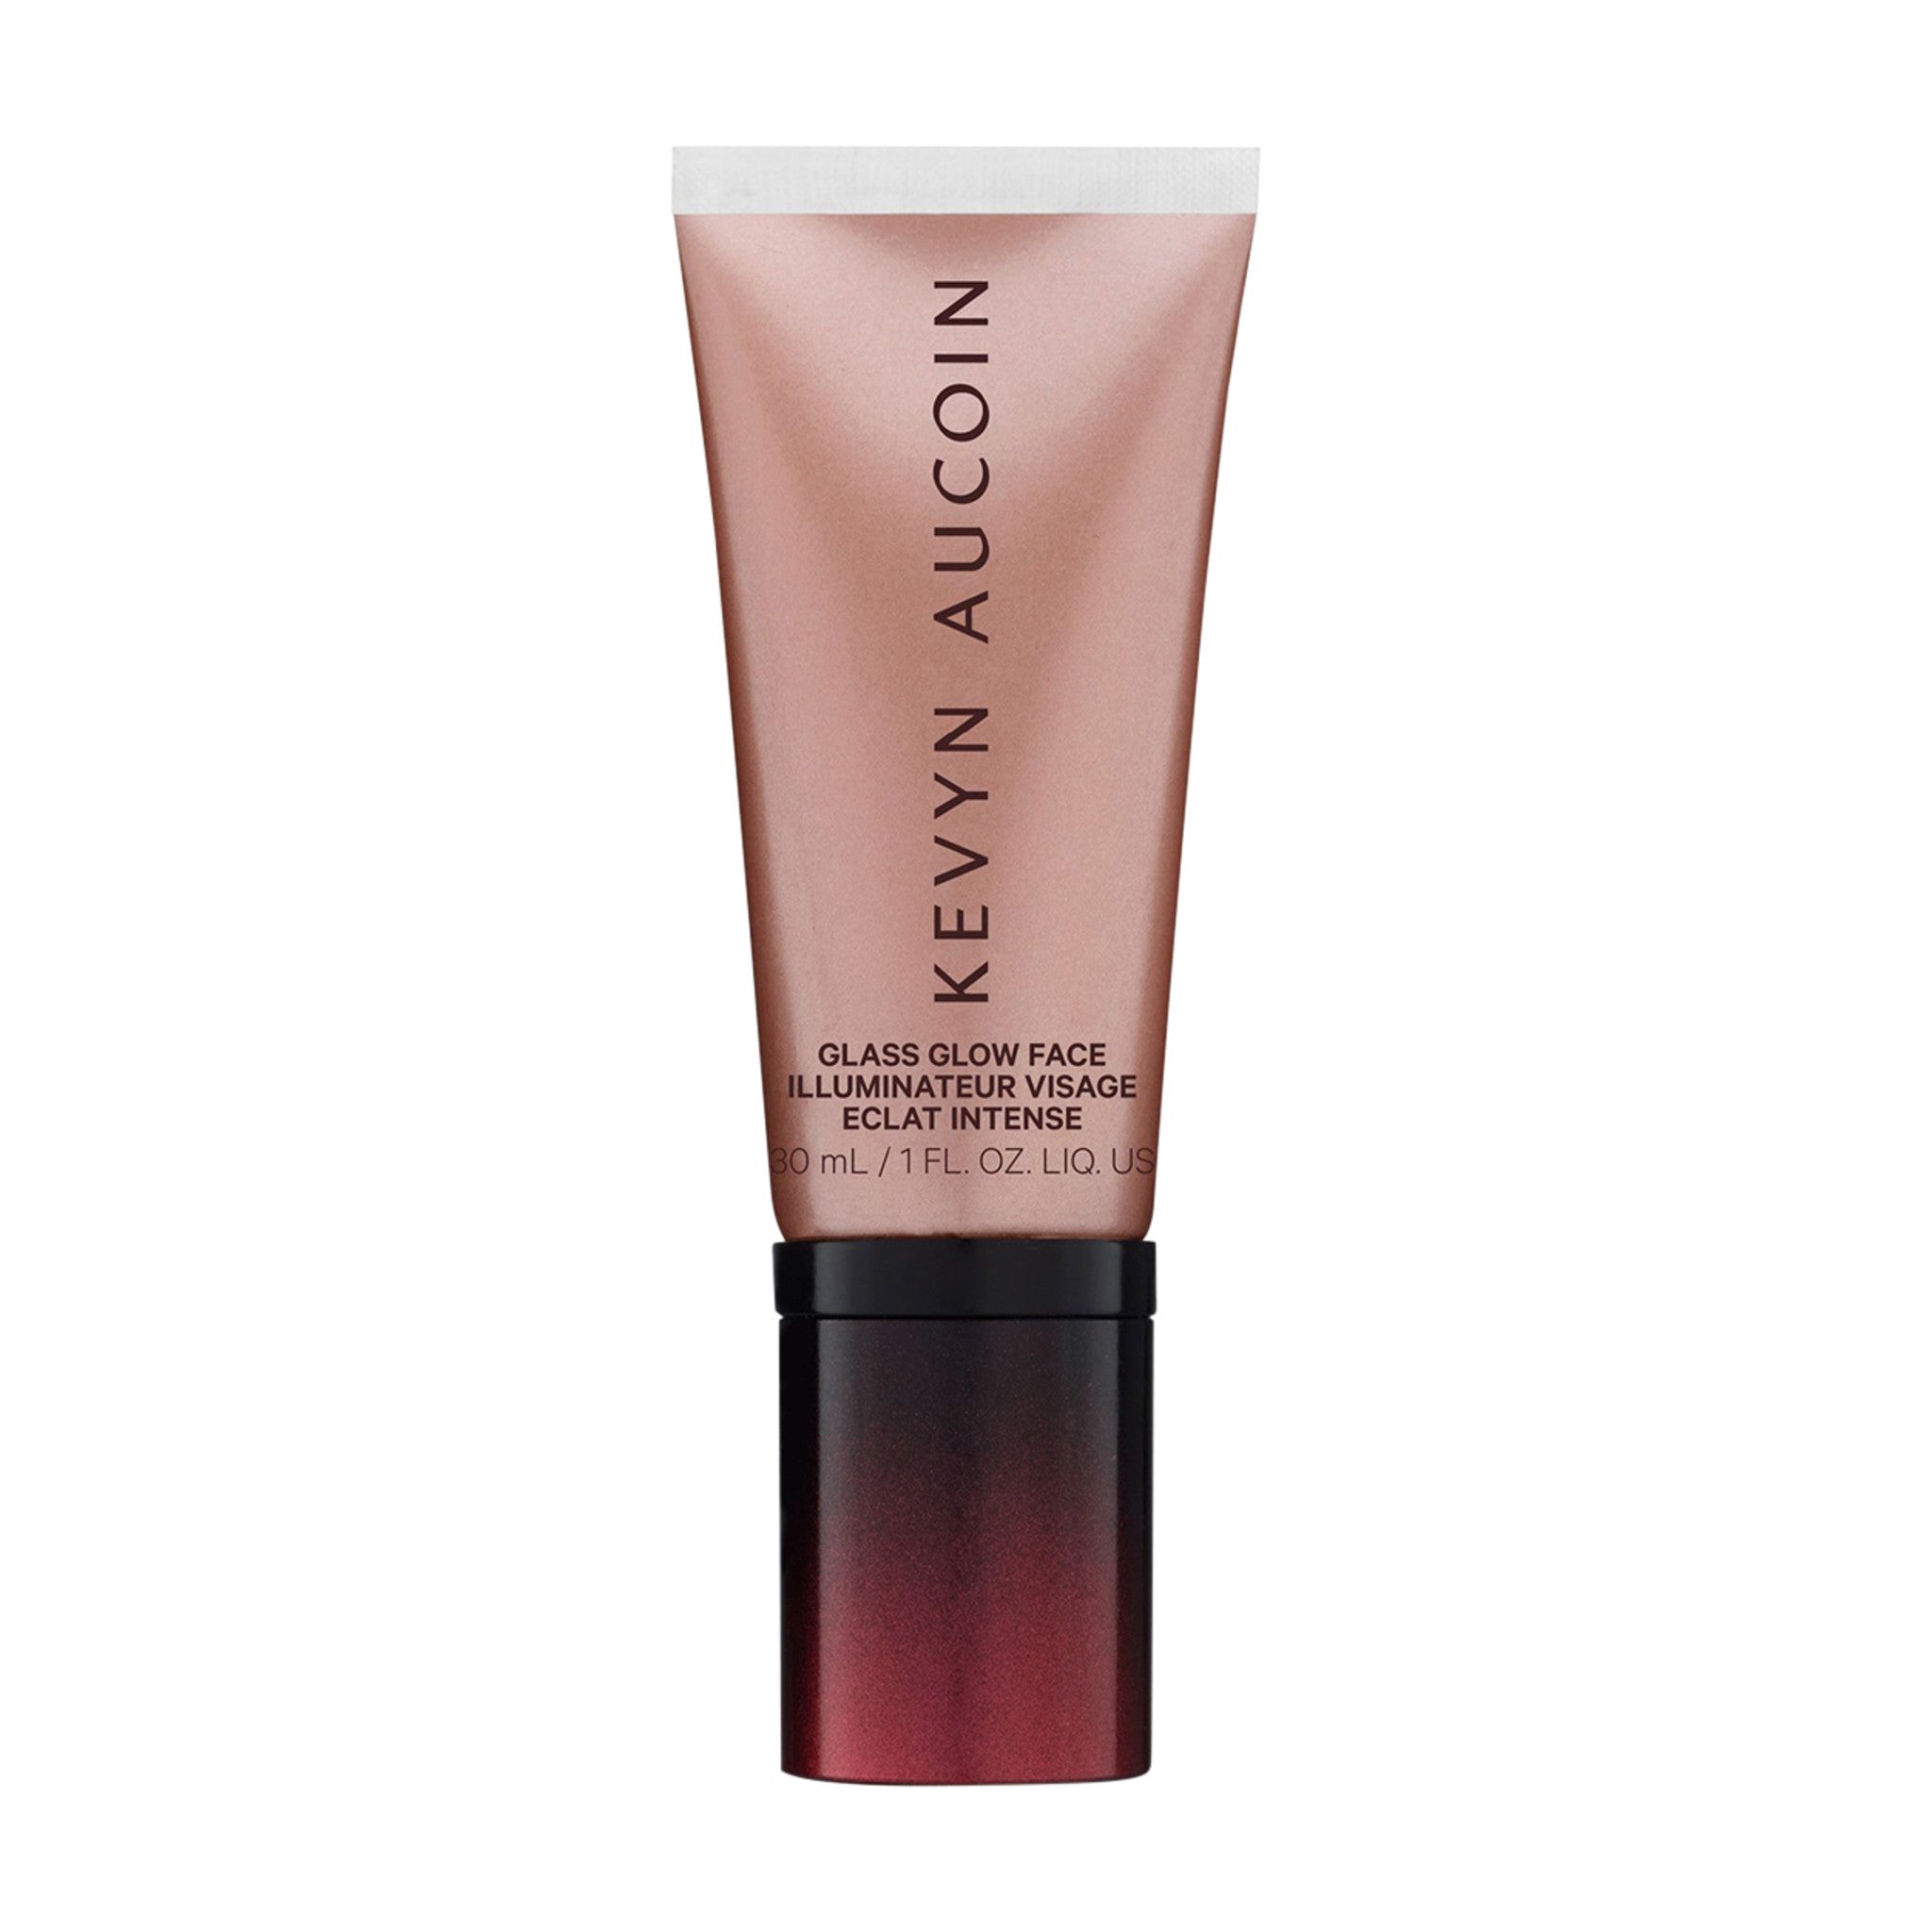 Kevyn Aucoin Glass Glow Face Liquid Illuminator Color/Shade variant: Prism Rose main image. This product is in the color pink